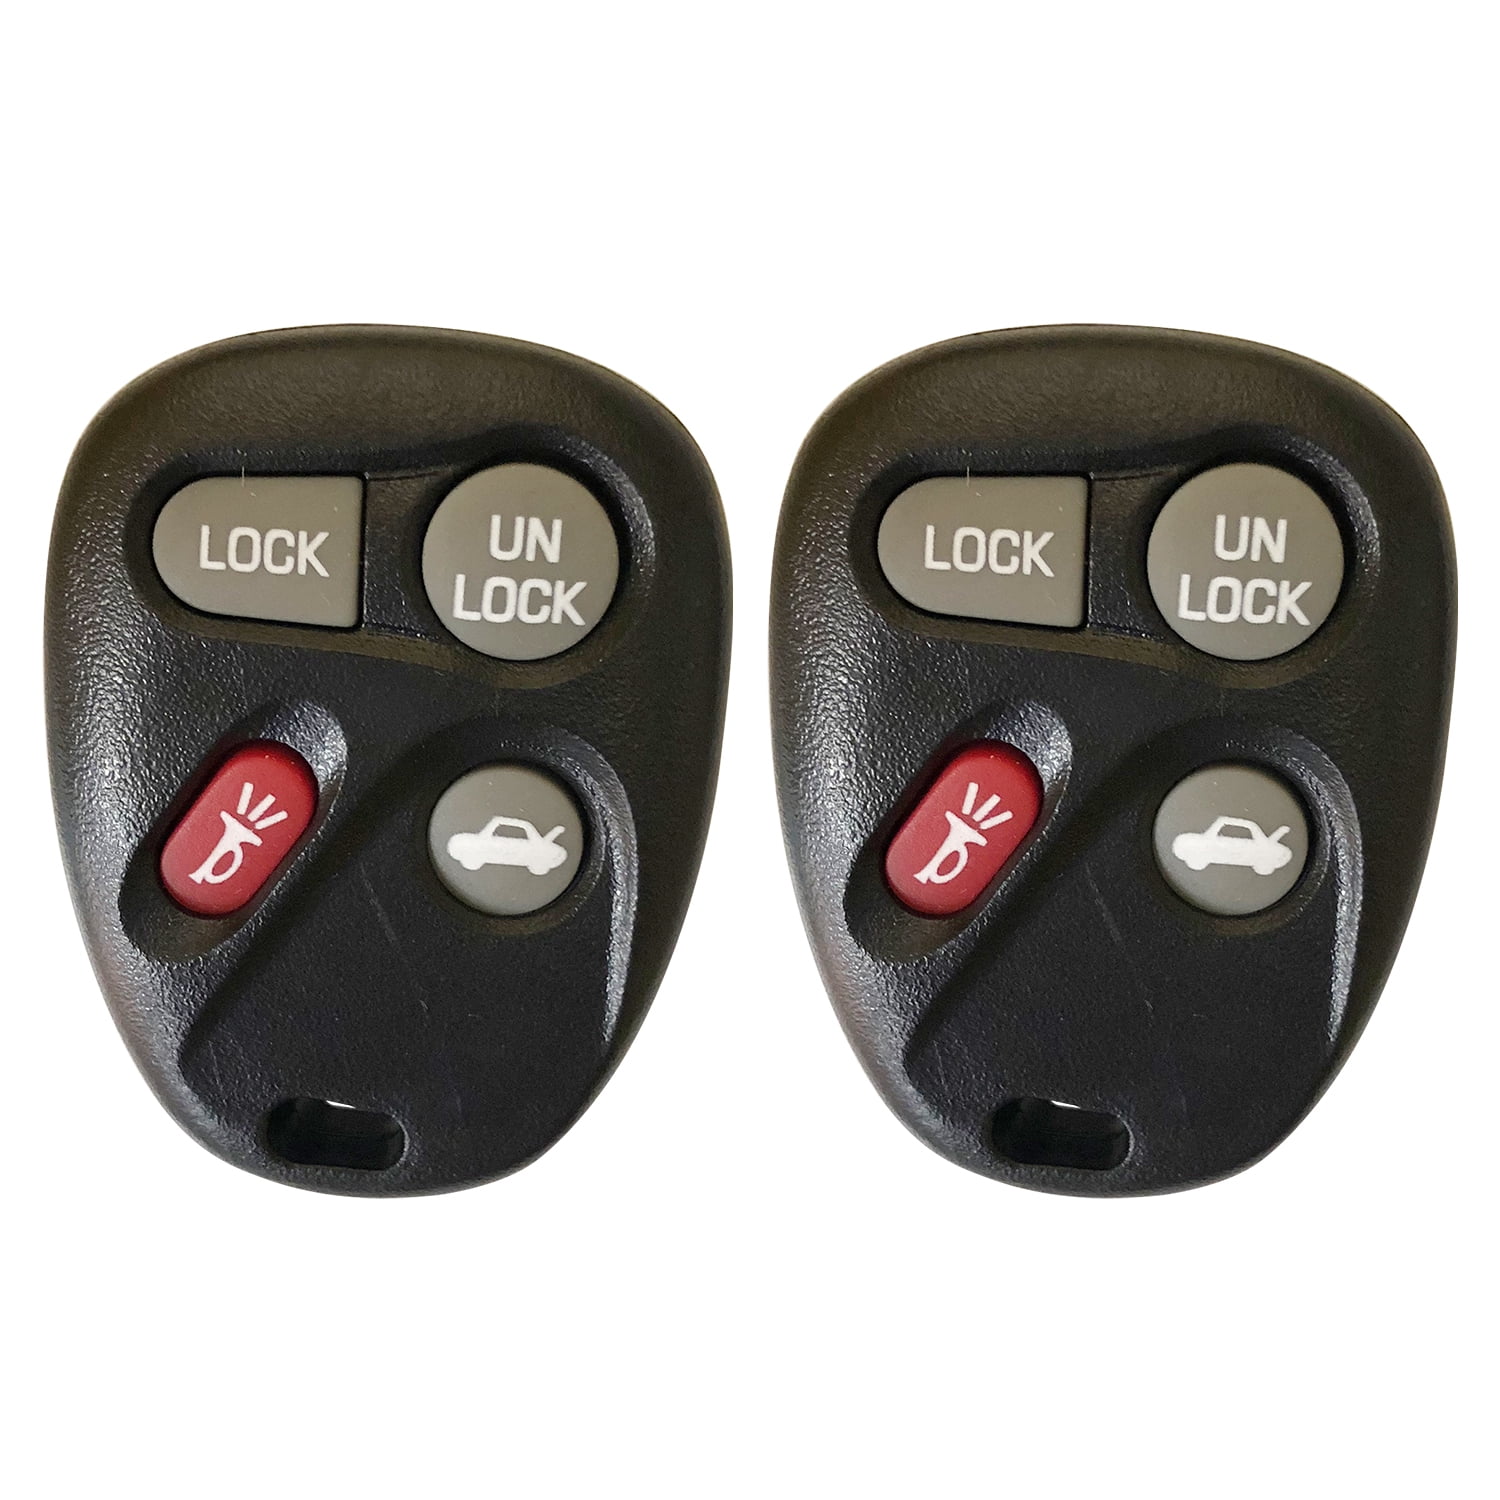 New Pink Replacement  Entry Remote Keyless Fob Key Control Transmitter  LHJ011 